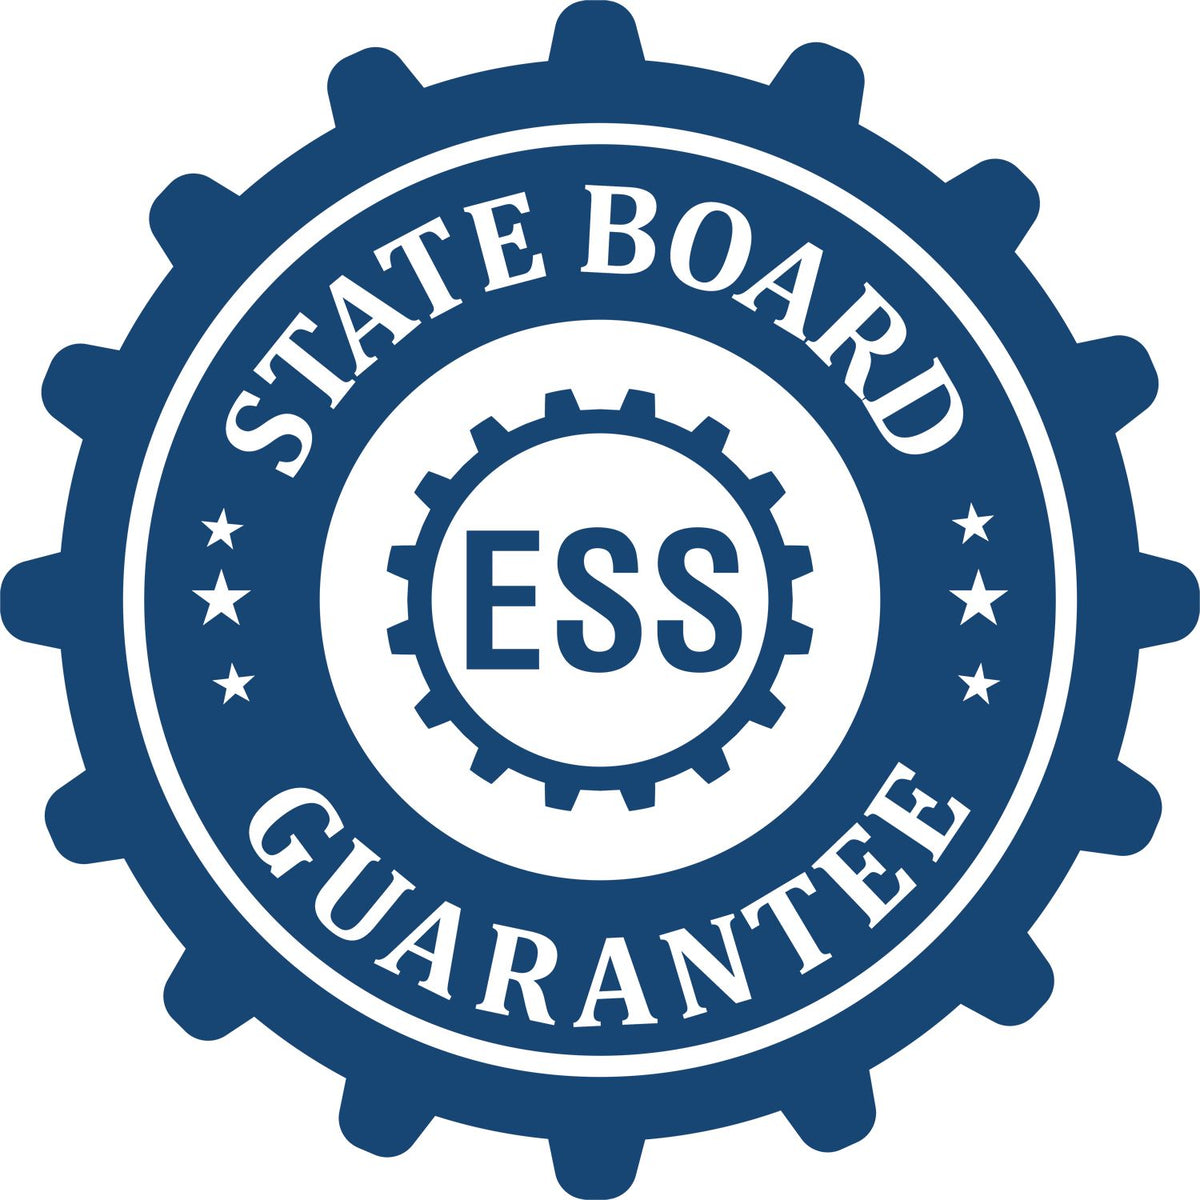 An emblem in a gear shape illustrating a state board guarantee for the Oklahoma Engineer Desk Seal product.